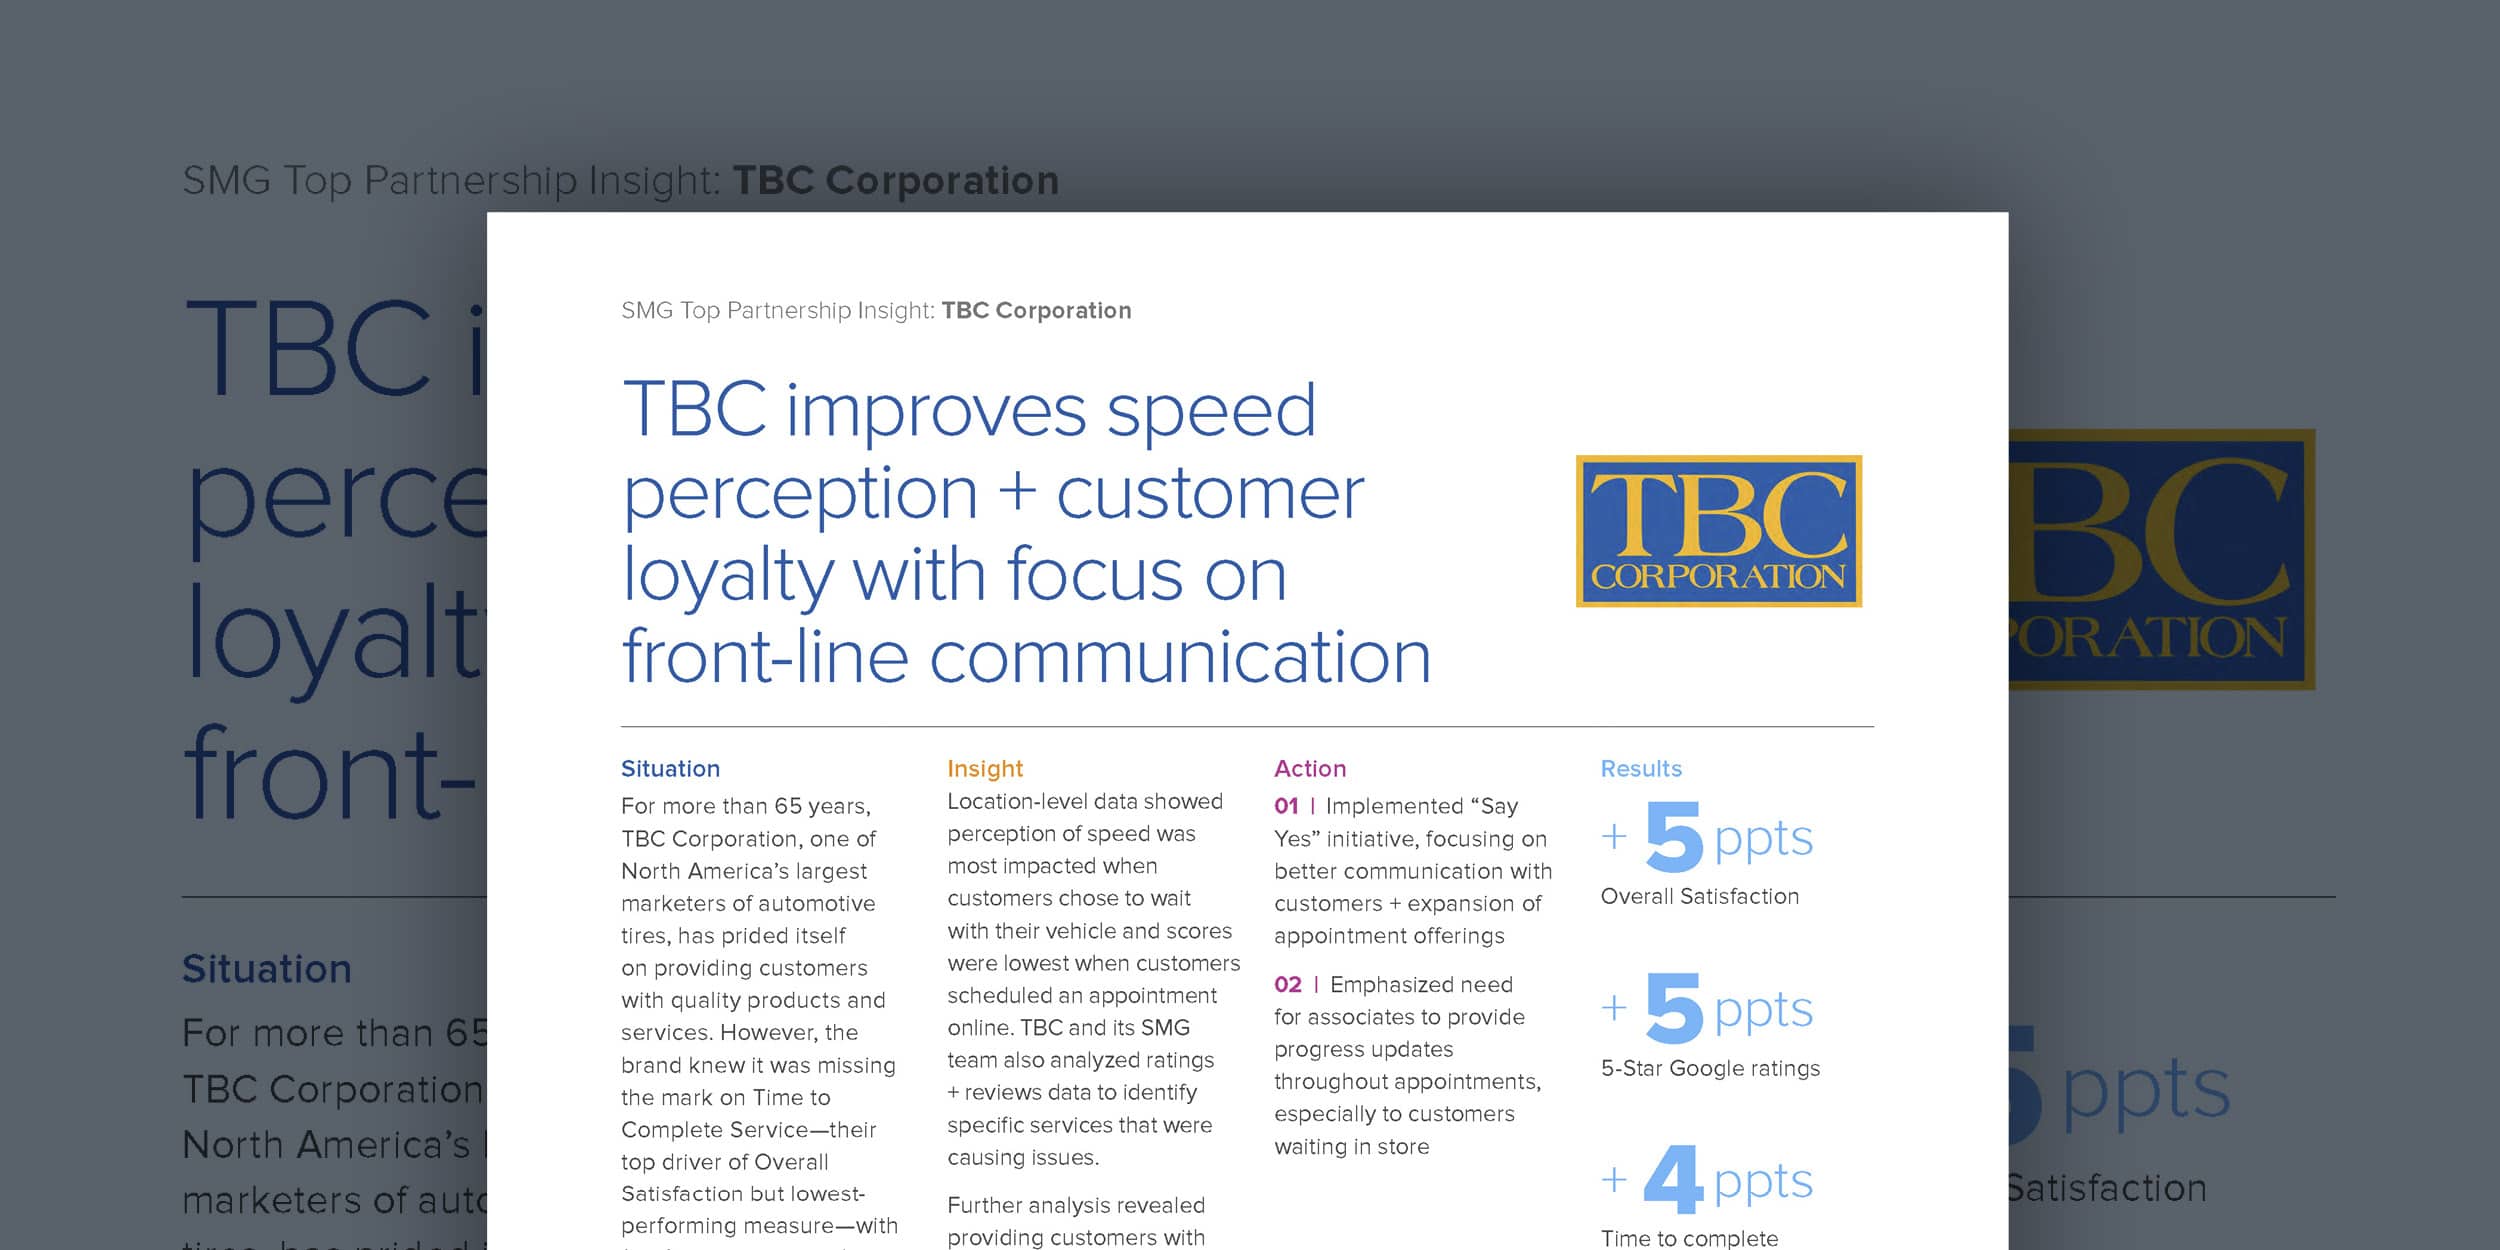 TBC improves speed perception + customer loyalty with focus on front-line communication